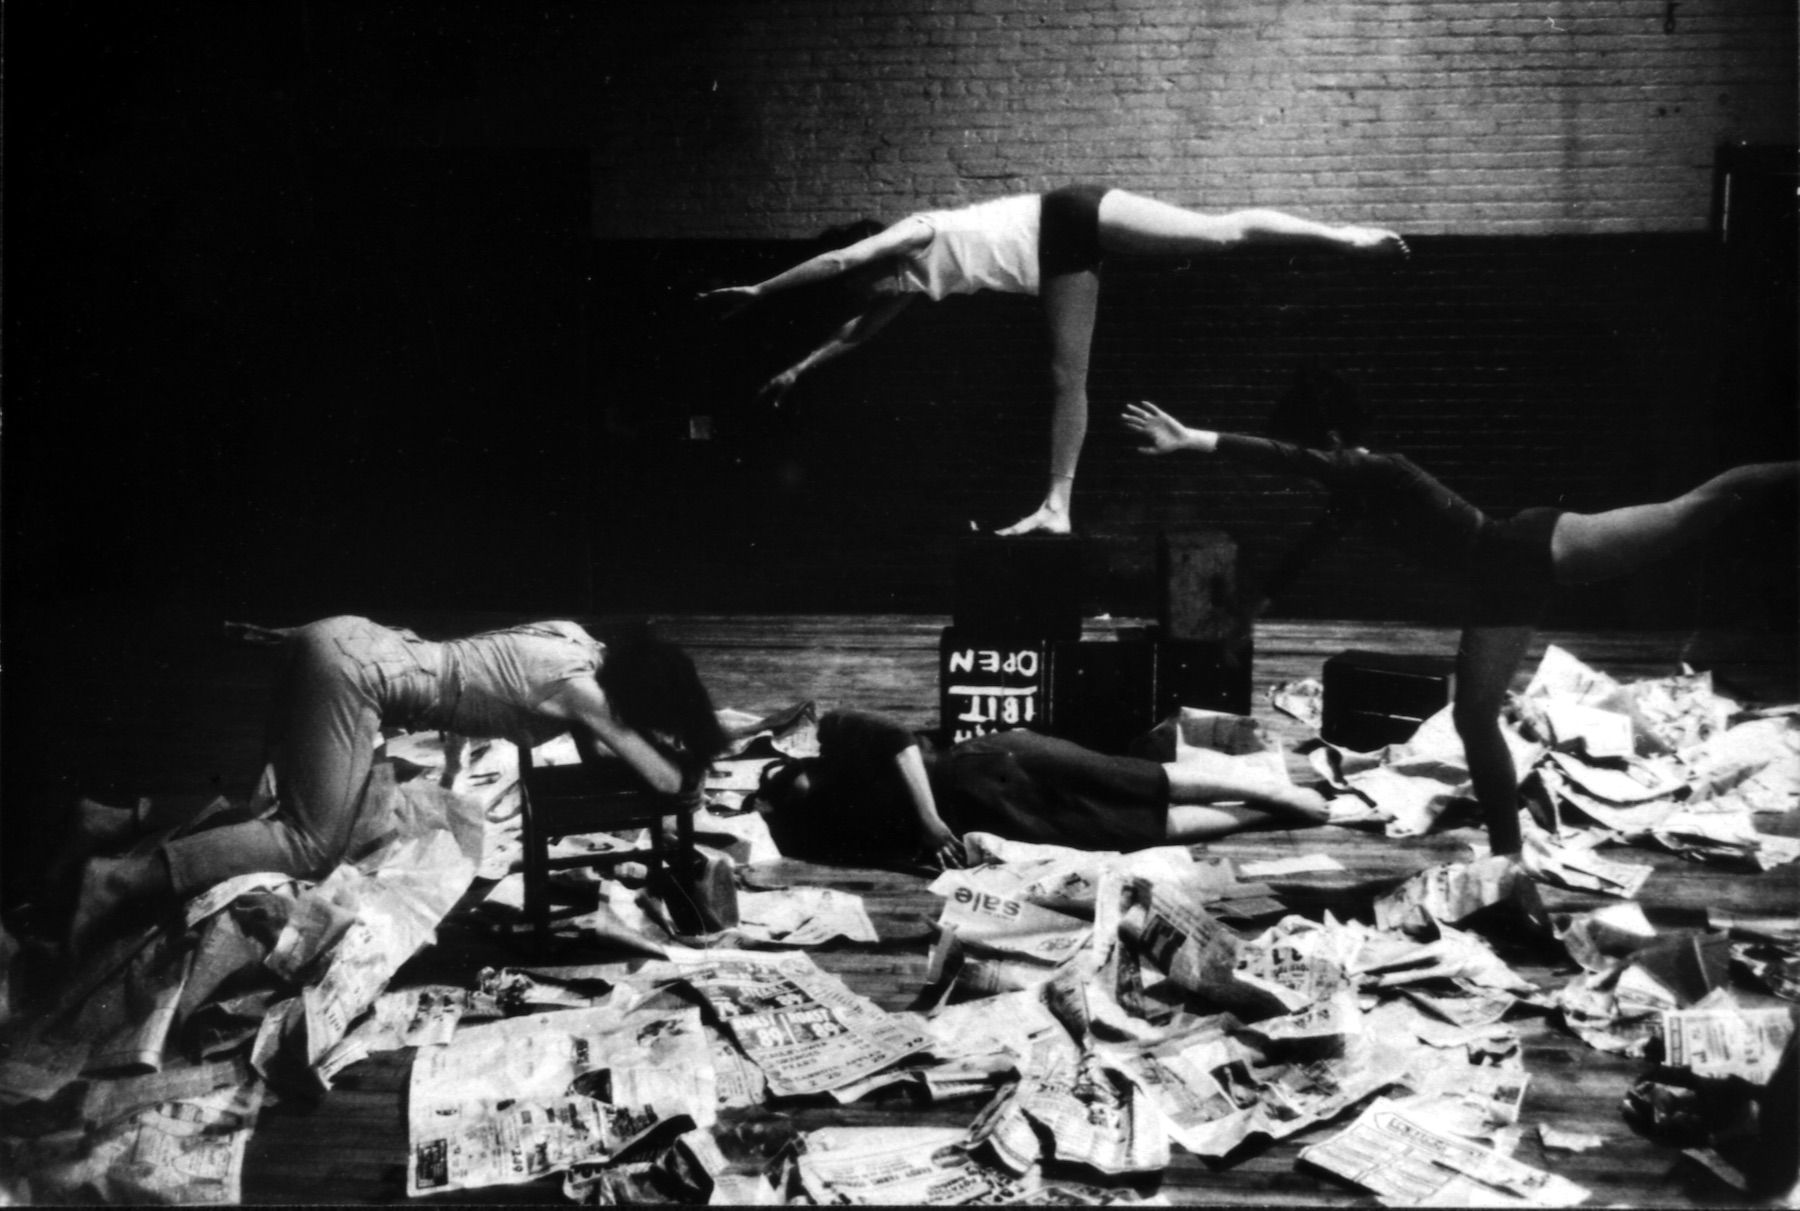 b/w photo of 4 dancers bending and crawling amidst a floor strewn with newspapers